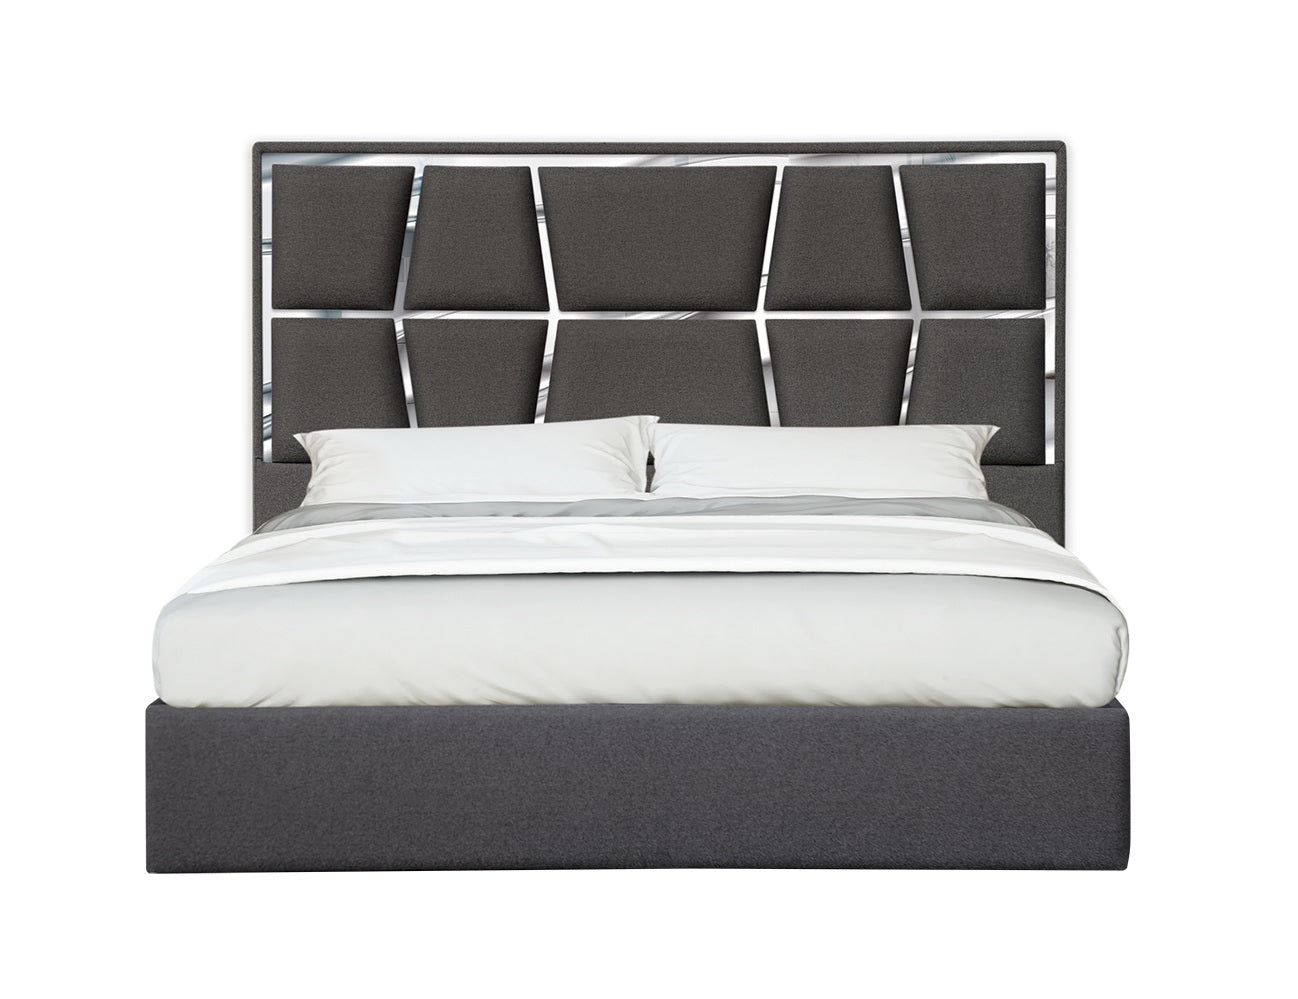 Degas Queen Bed Charcoal by JM